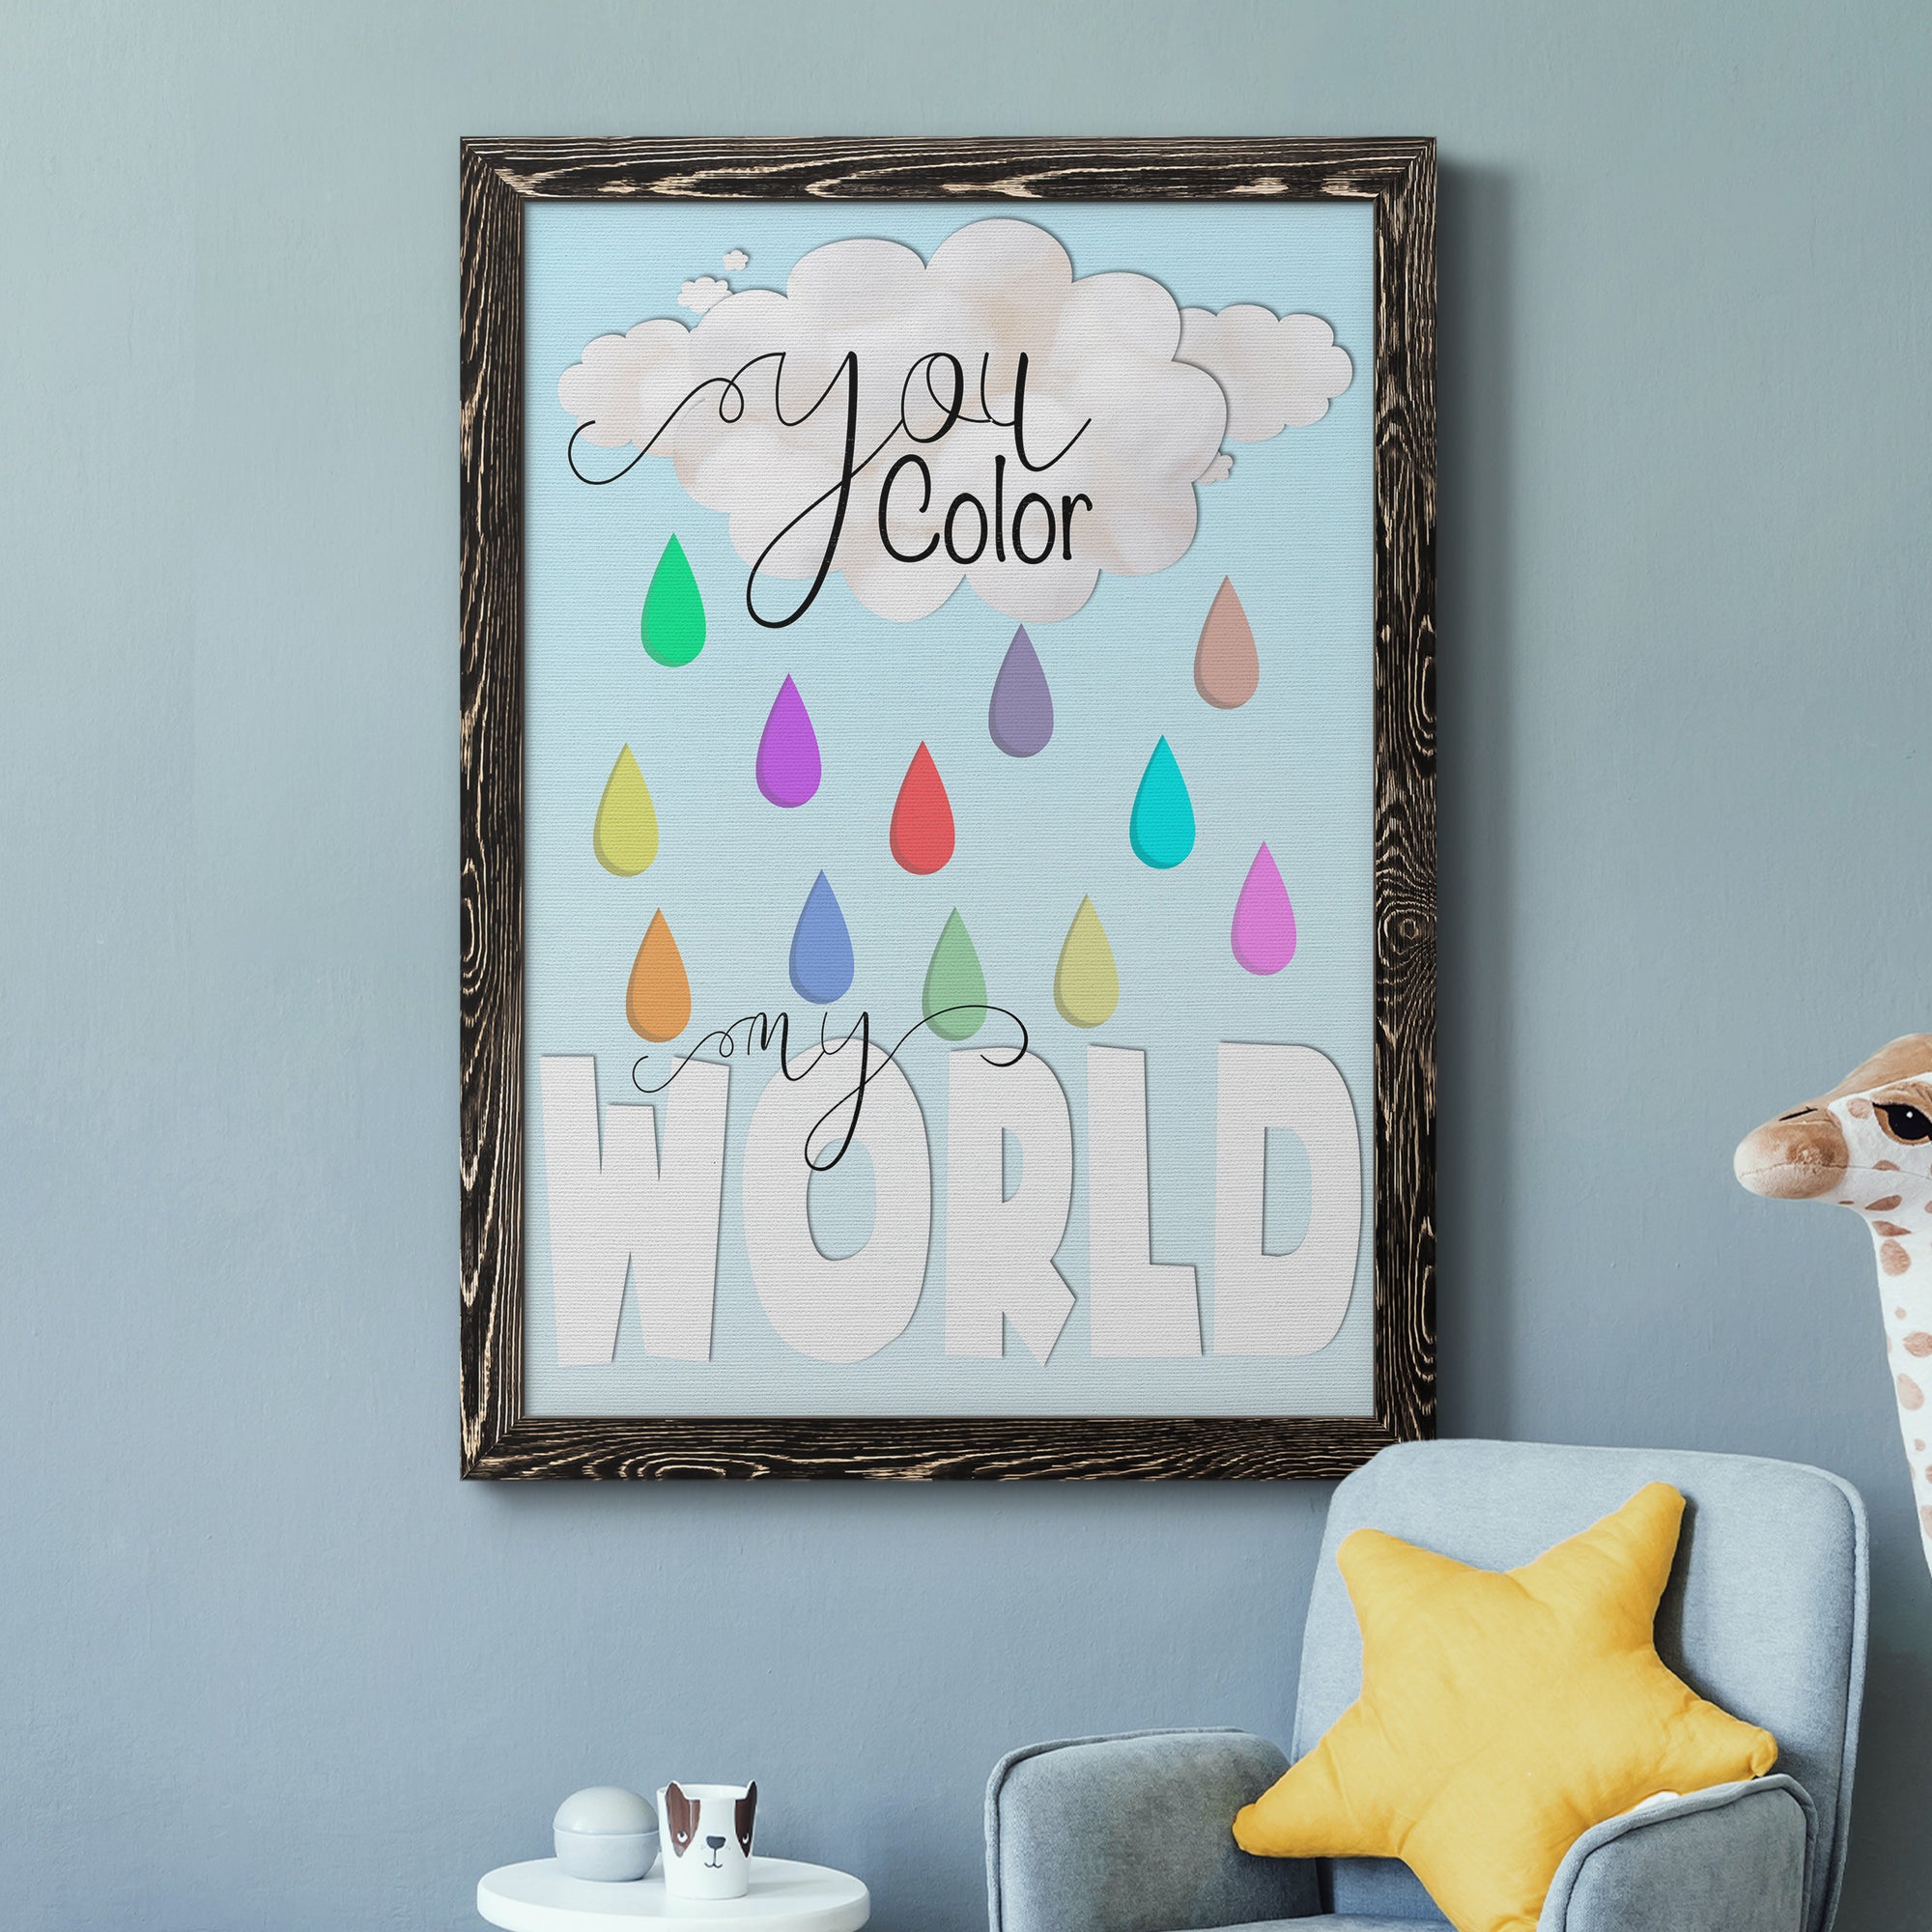 Color My World - Premium Canvas Framed in Barnwood - Ready to Hang